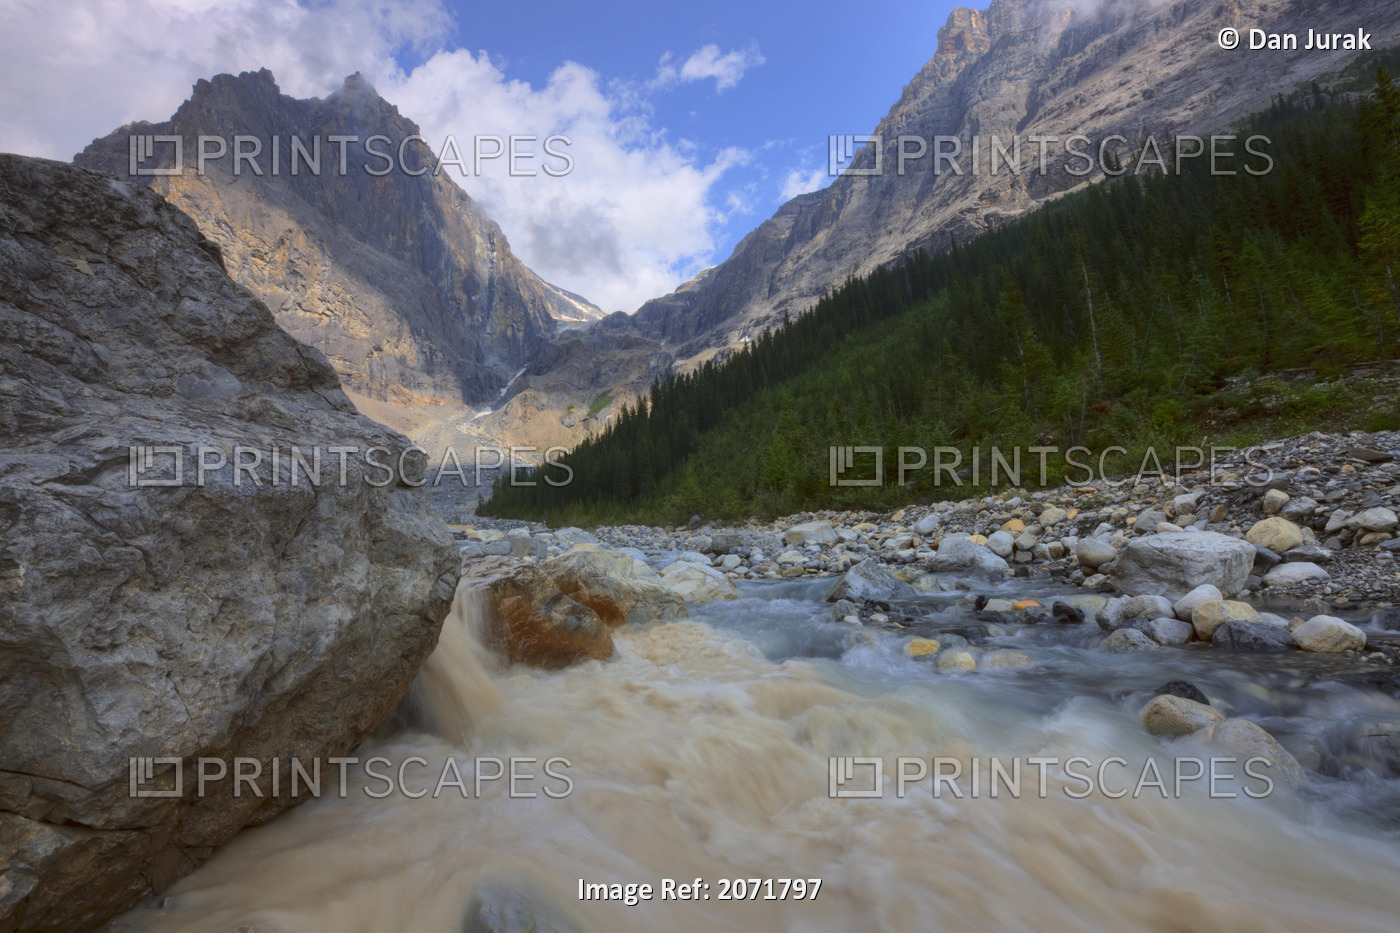 Muddy Runoff In The Emerald Basin With The President Range Mountains In The ...